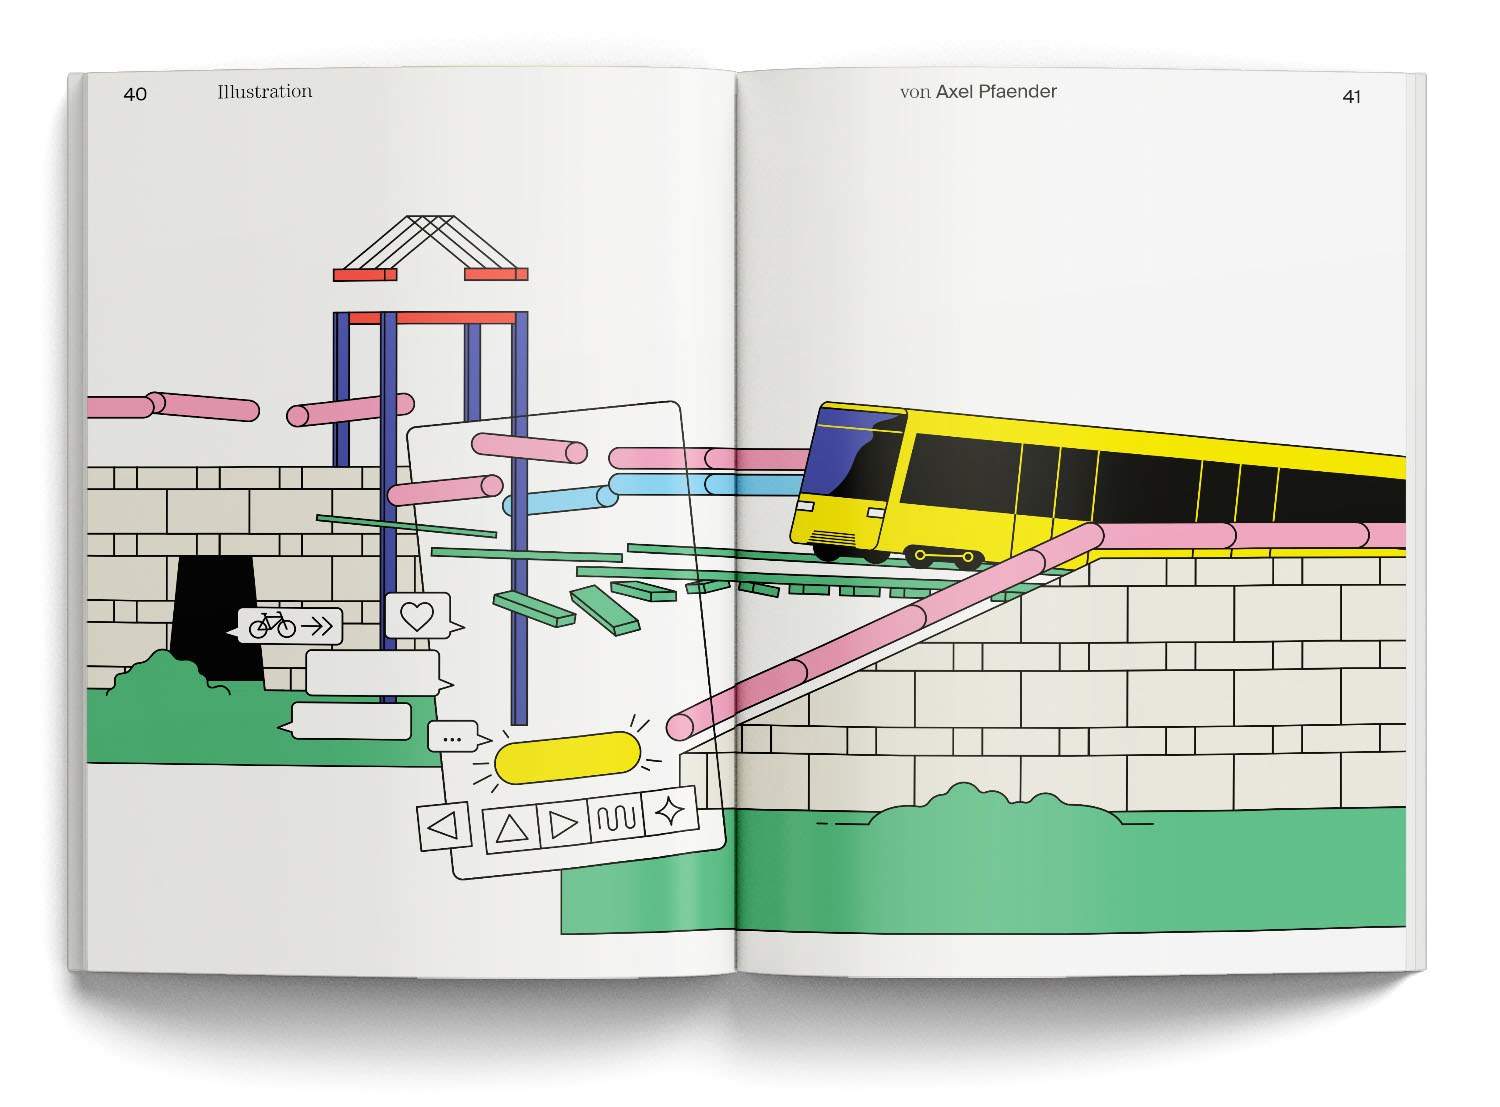 Magazine page with illustration of Staatsgalerie Stuttgart, by James Stirling. Illustration by Axel Pfaender.